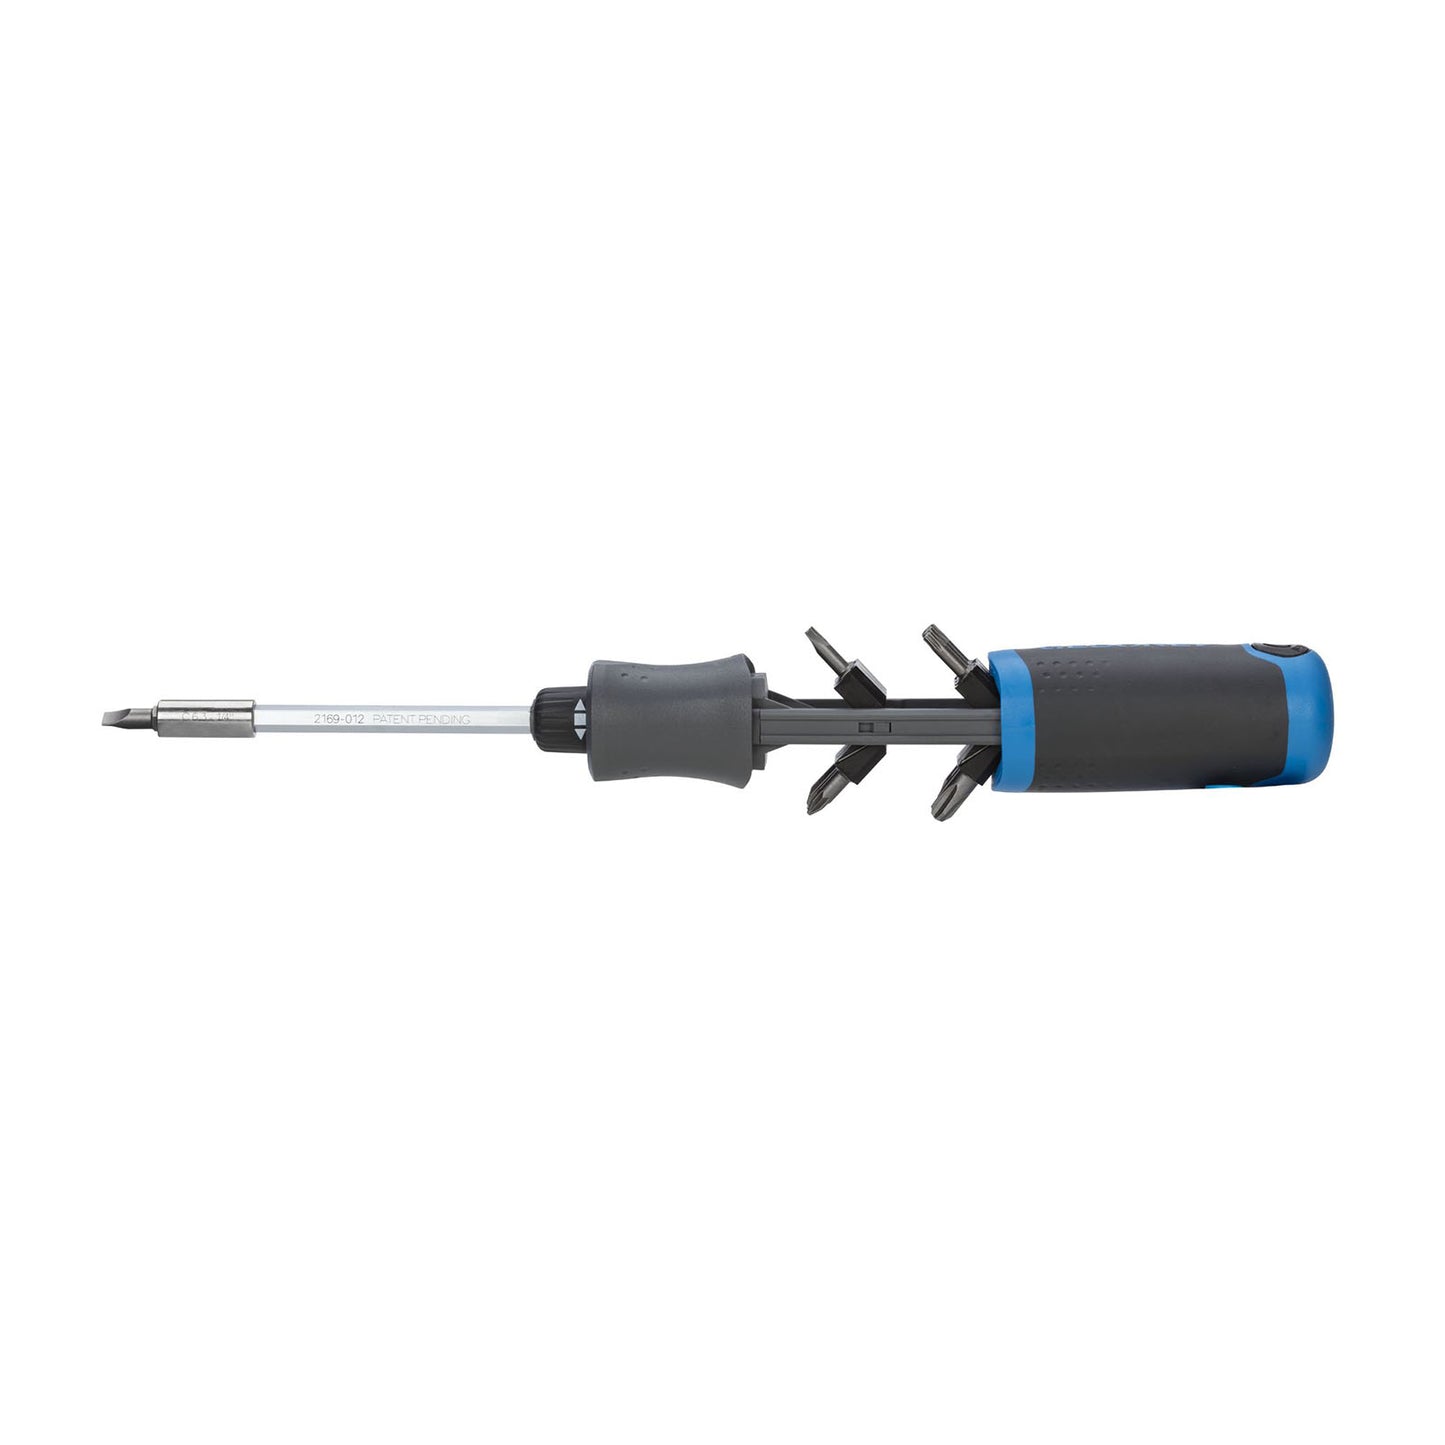 GEDORE 2169-012 - Screwdriver with reservoir (3031691)